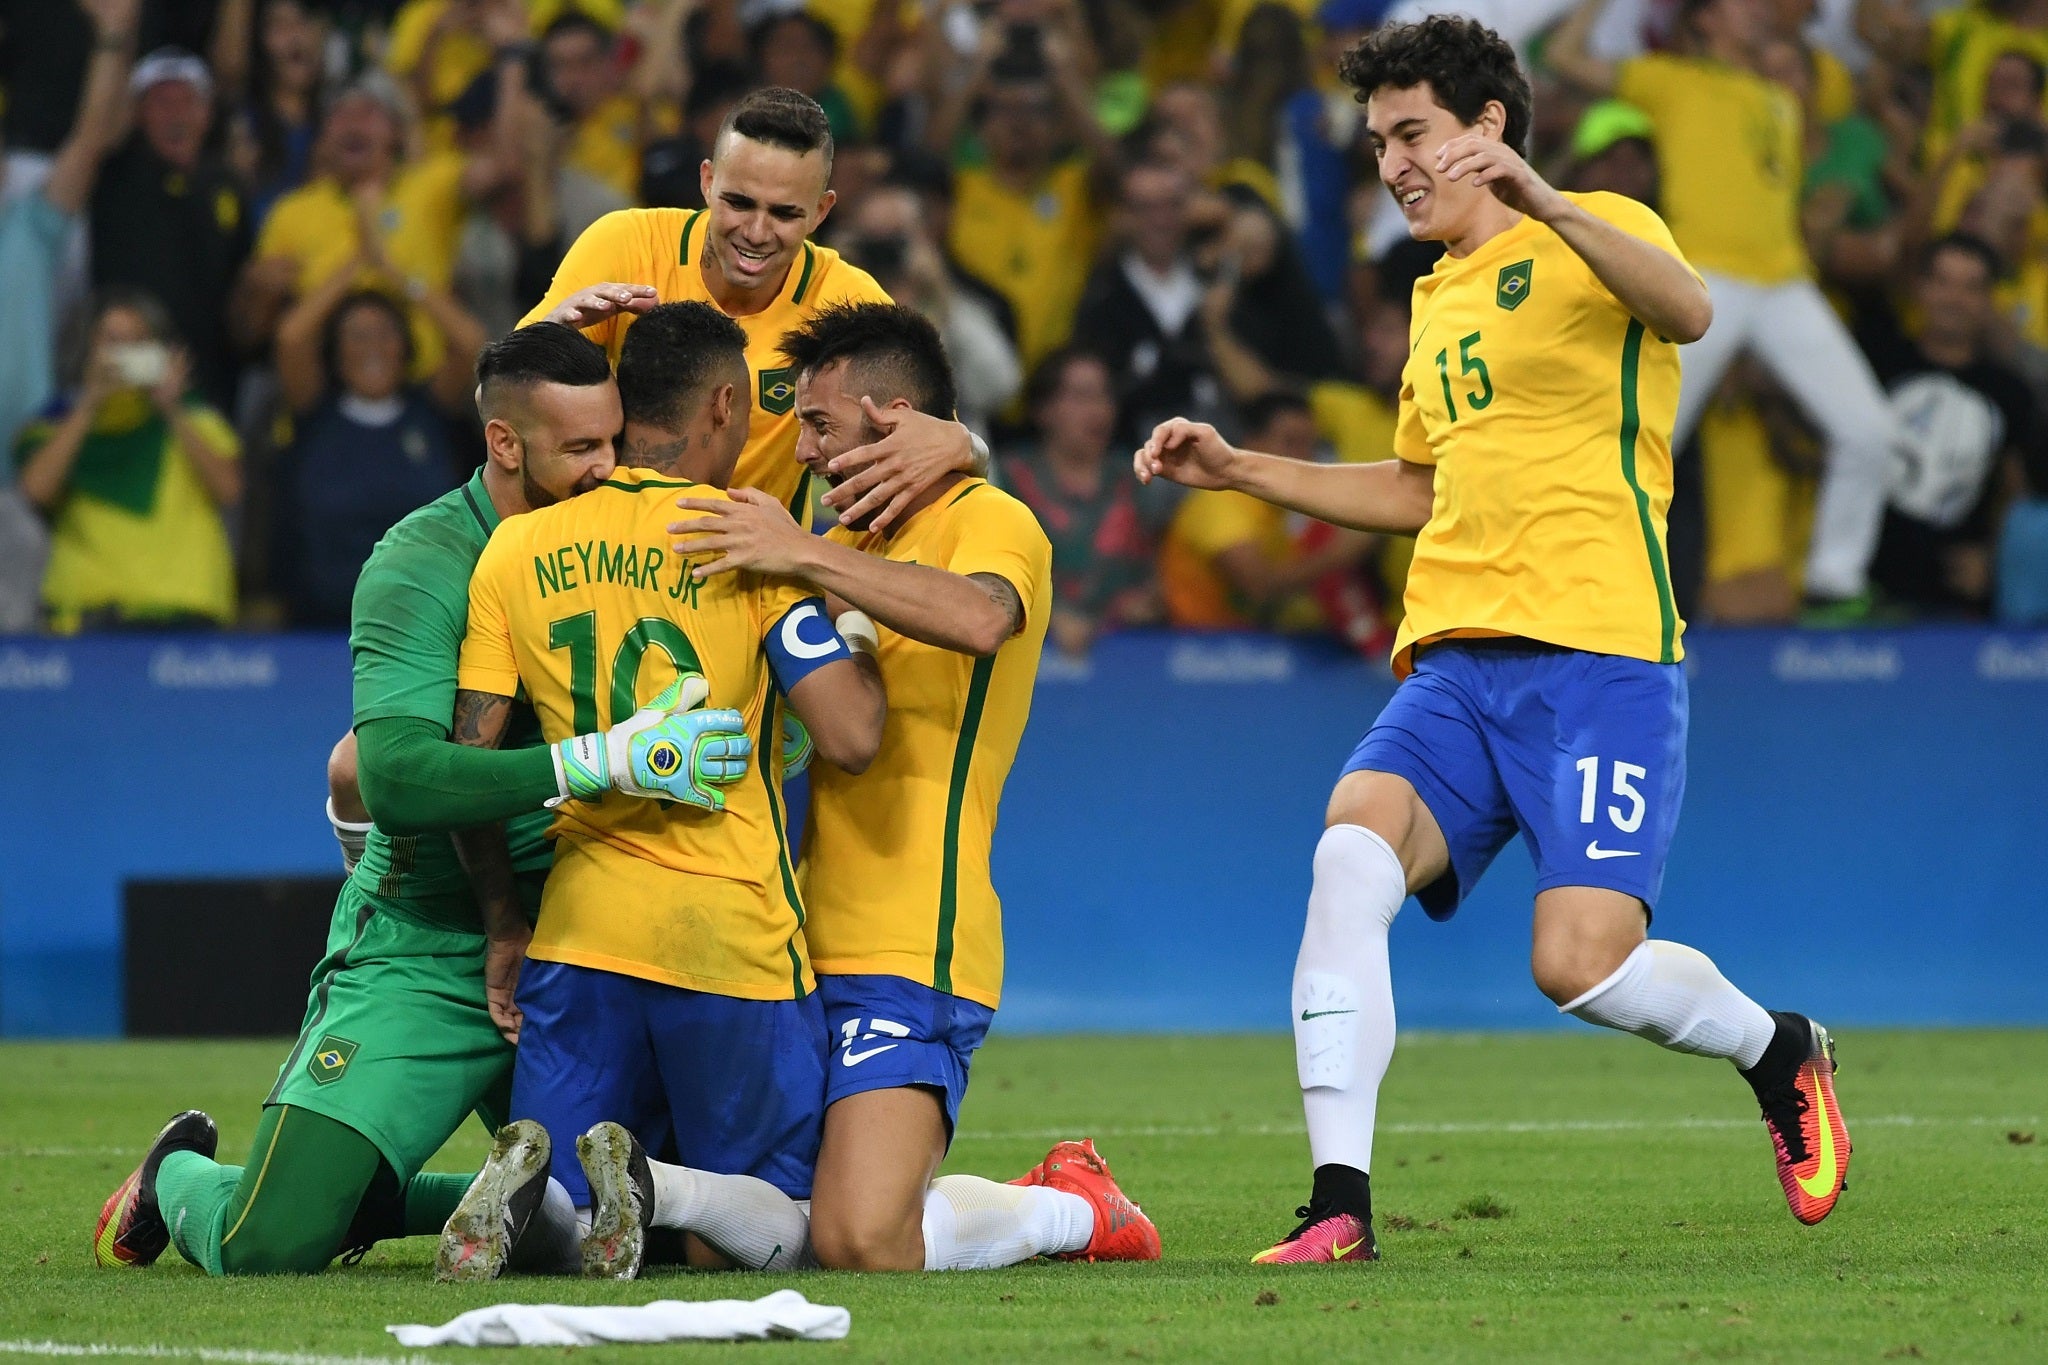 Brazil players celebrate after Neymar scores the winning penalty to win gold